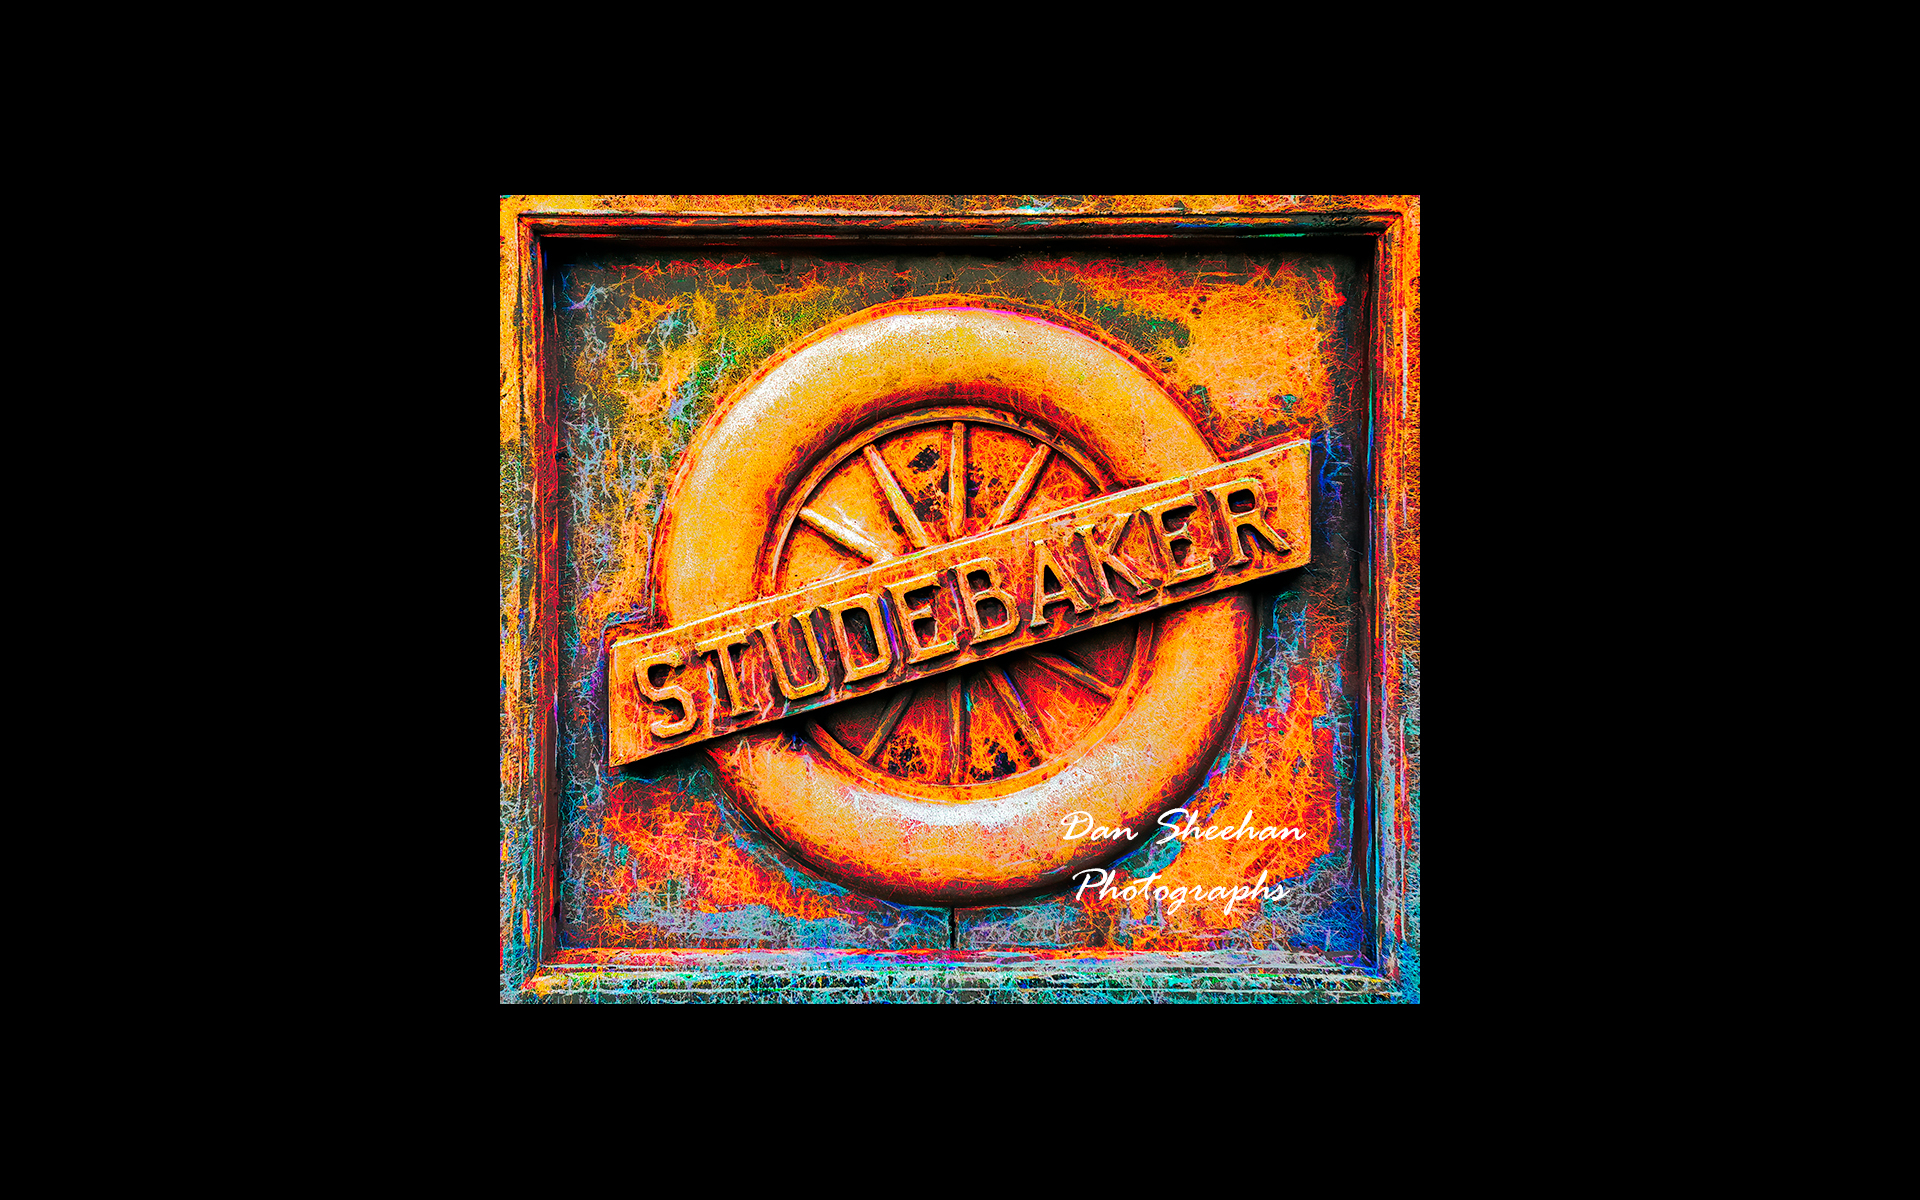 Studebaker National Museum in South Bend, Indiana. Car junkies should have this museum on their list of places to visit.  : Cars : Dan Sheehan Photographs - Fine Art Stock Photography